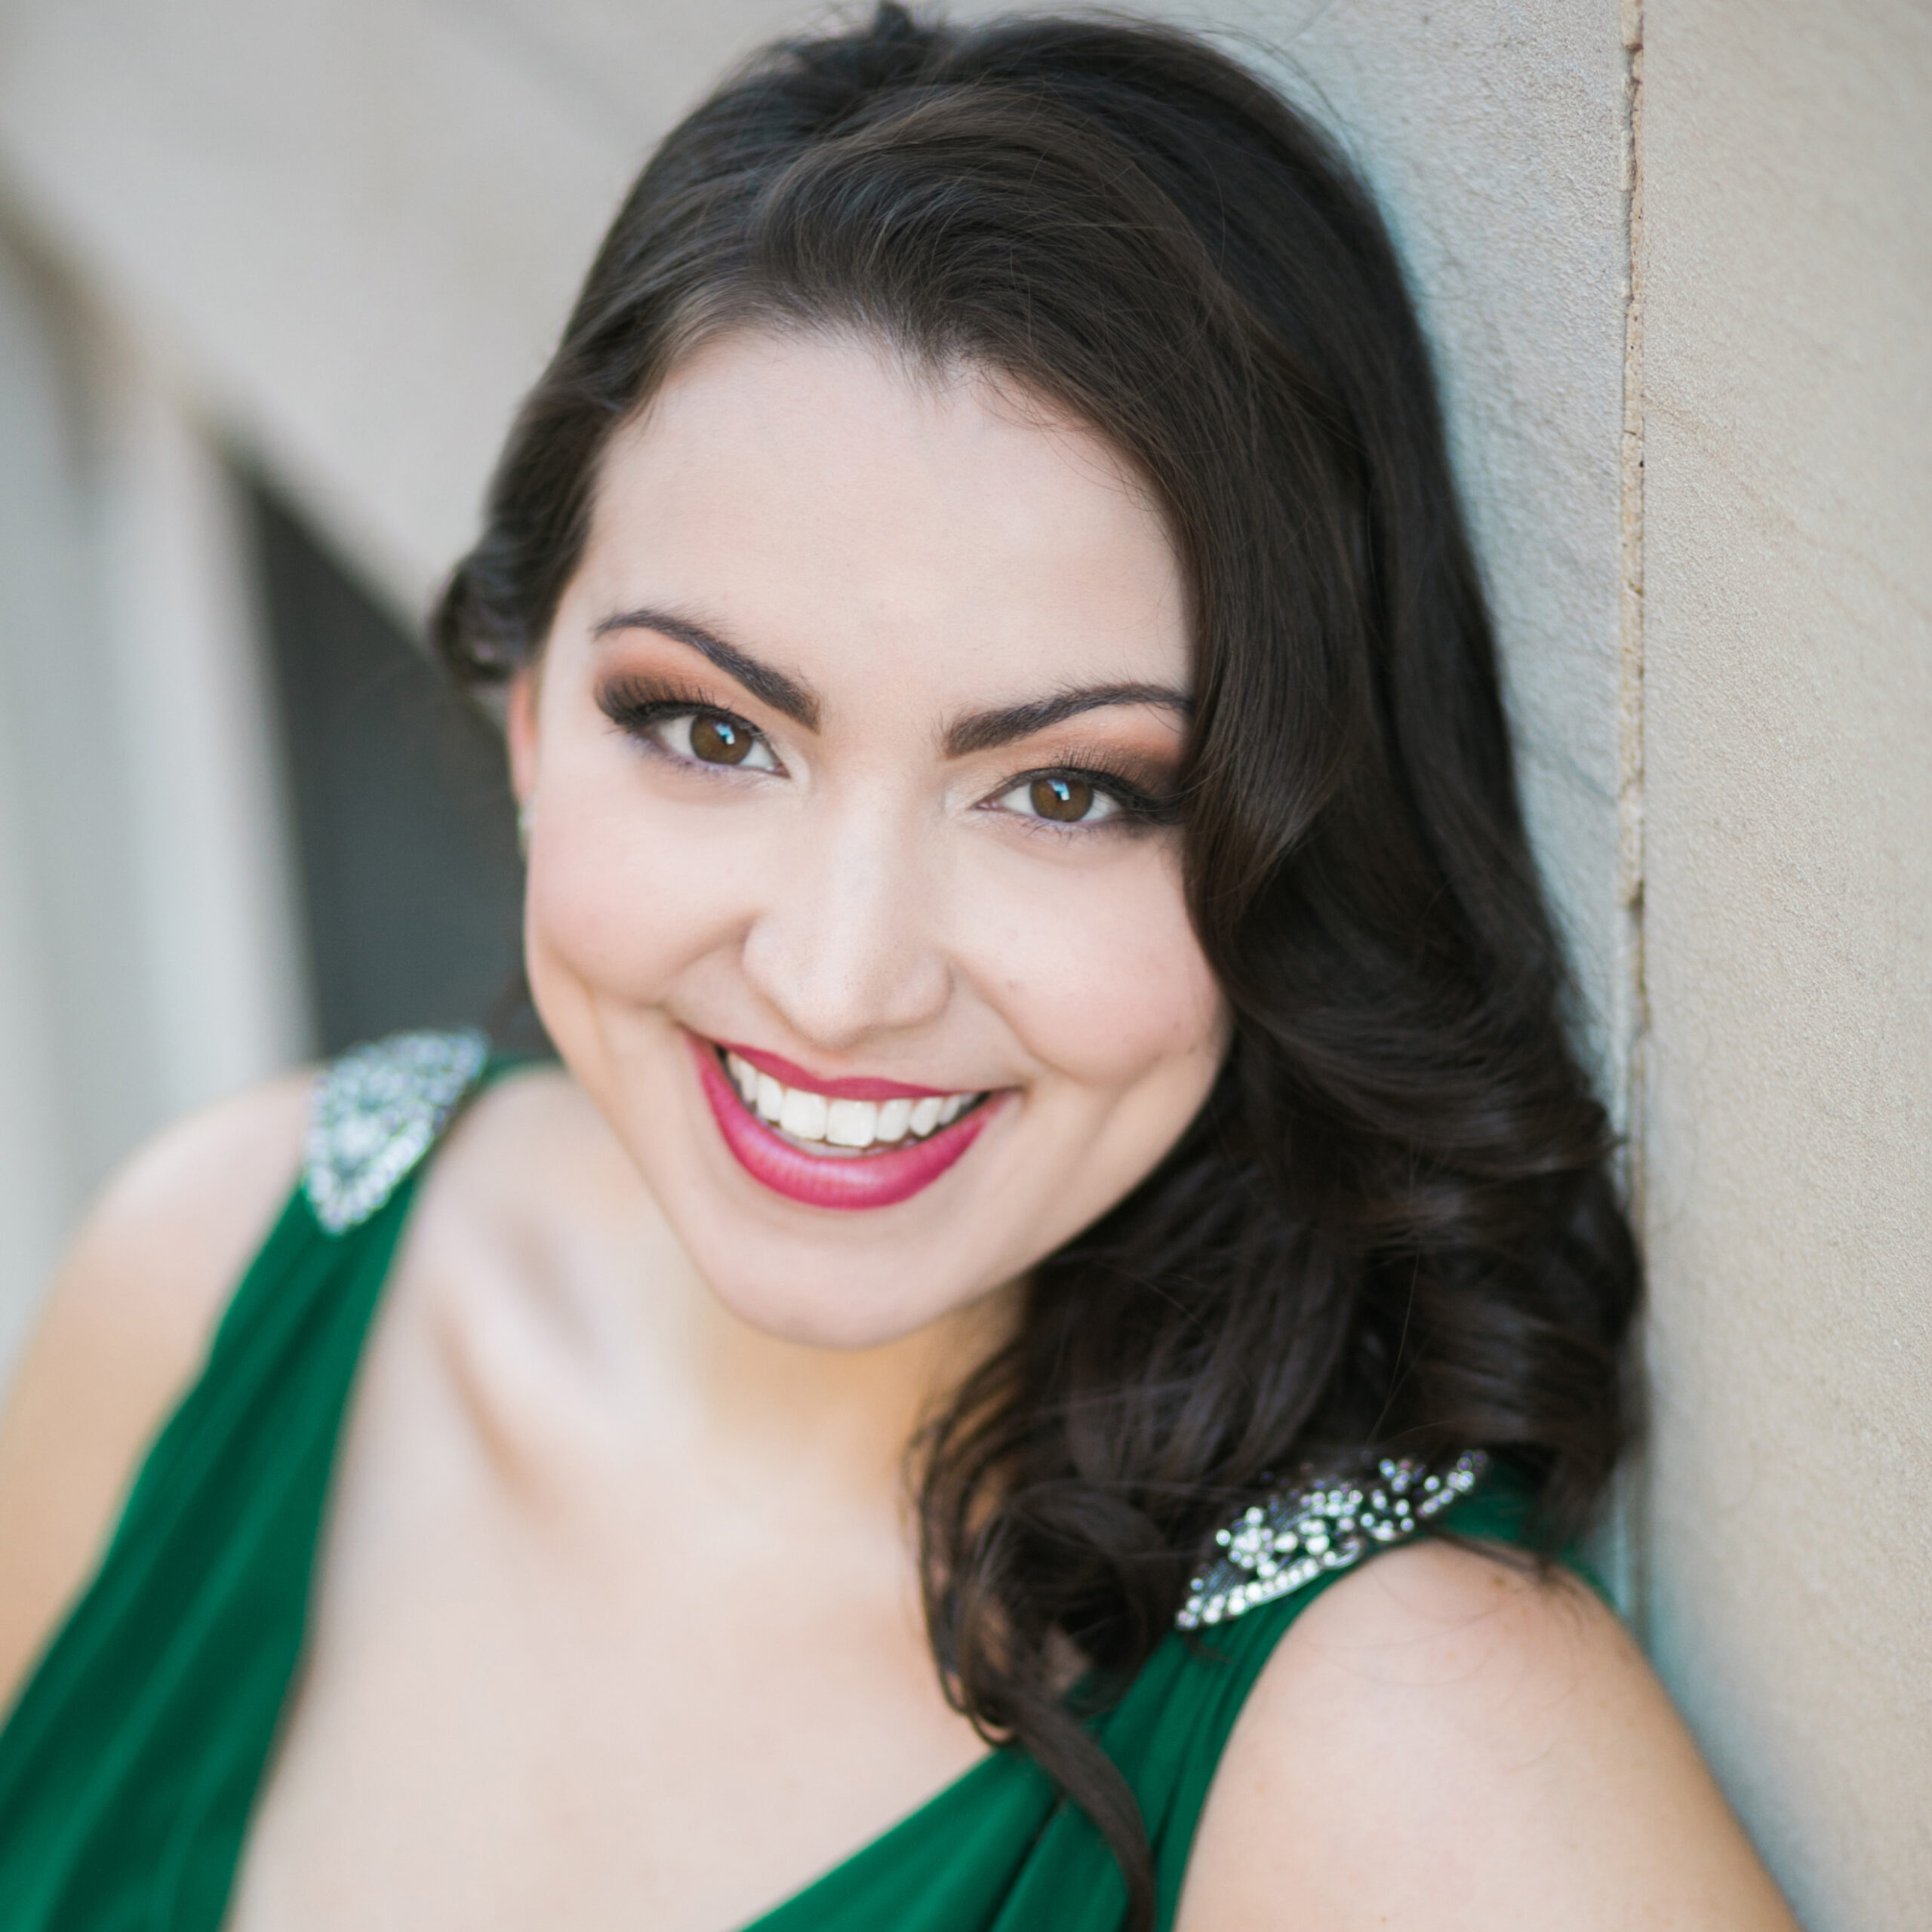 Headshot of a woman with dark black hair wearing a green dress smiles at the camera